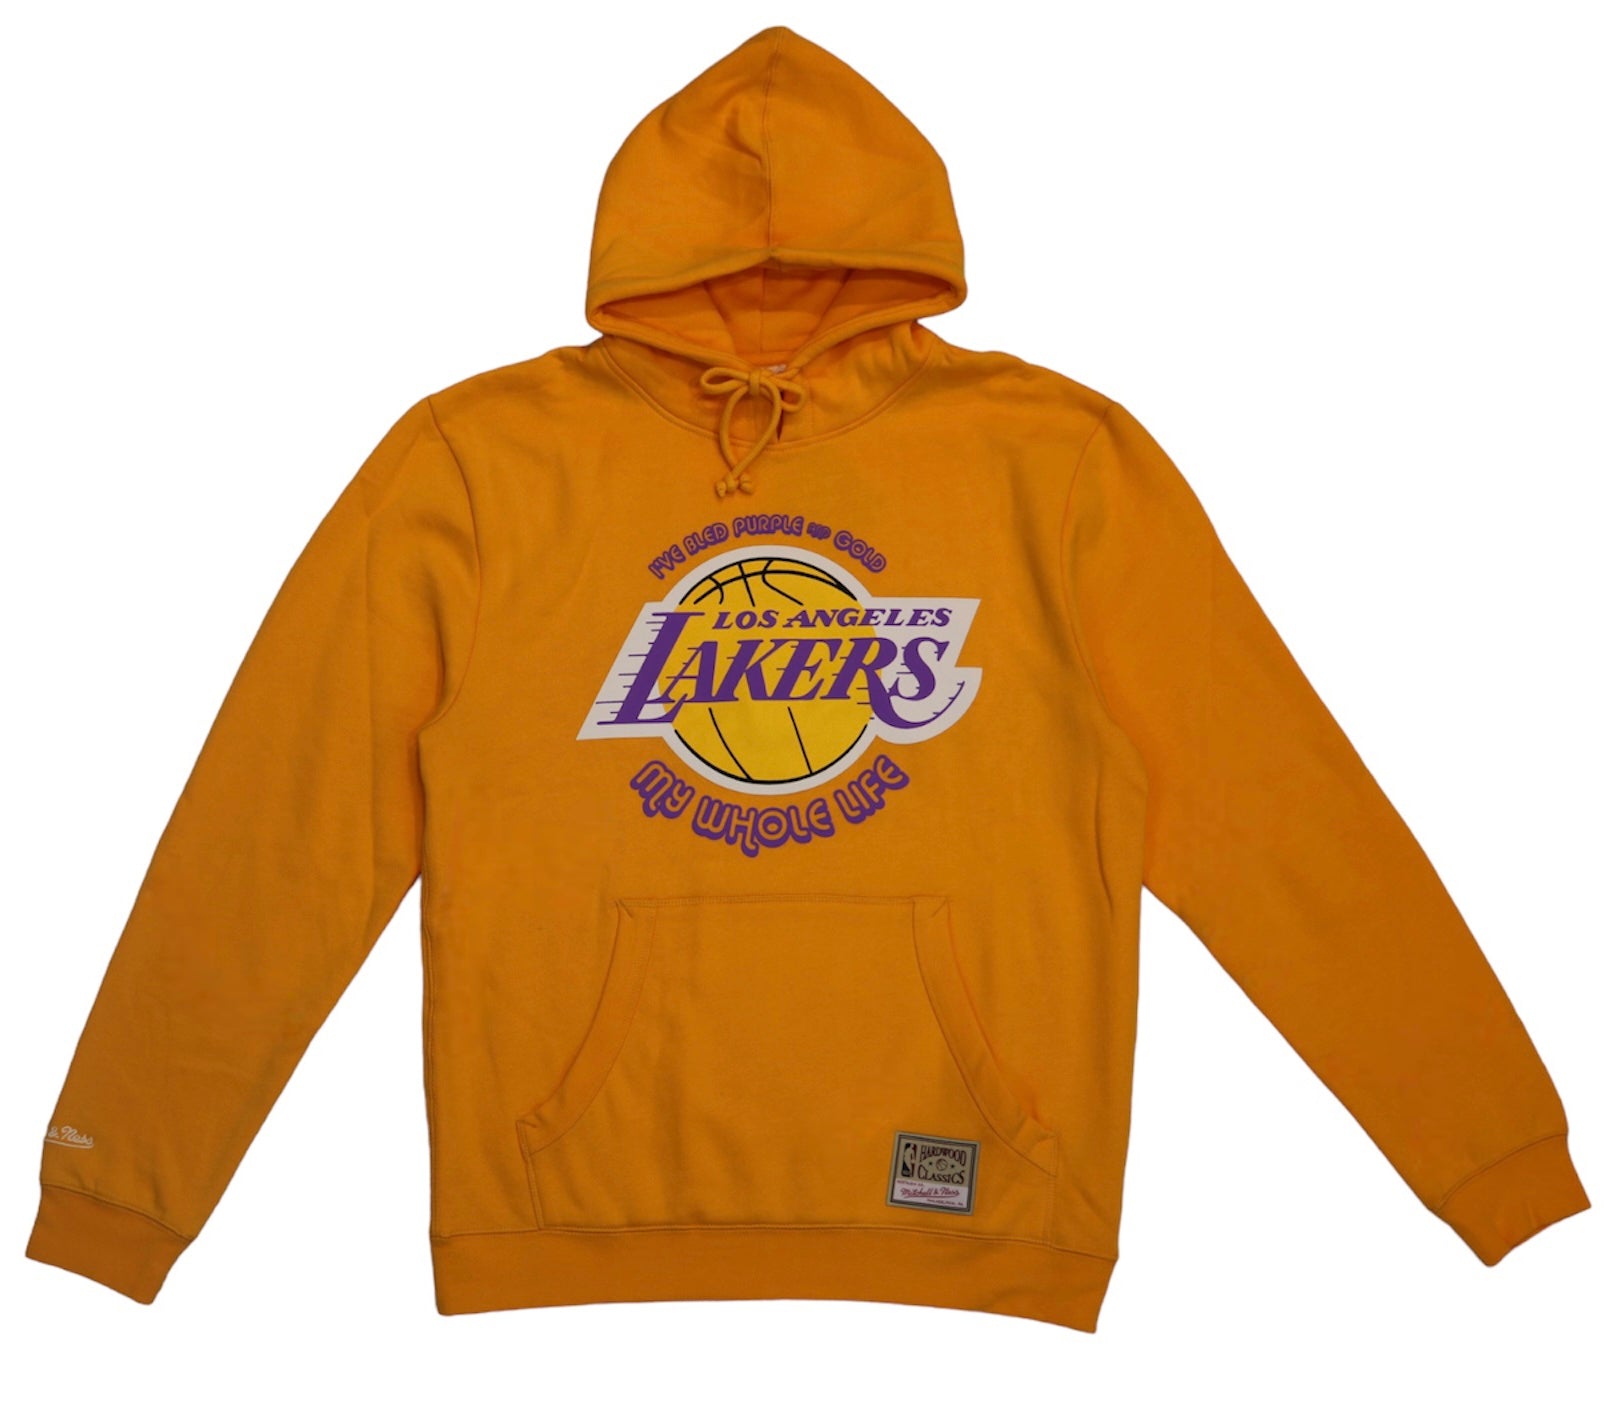 Mitchell & Ness Lakers All My Life Hoodie XL